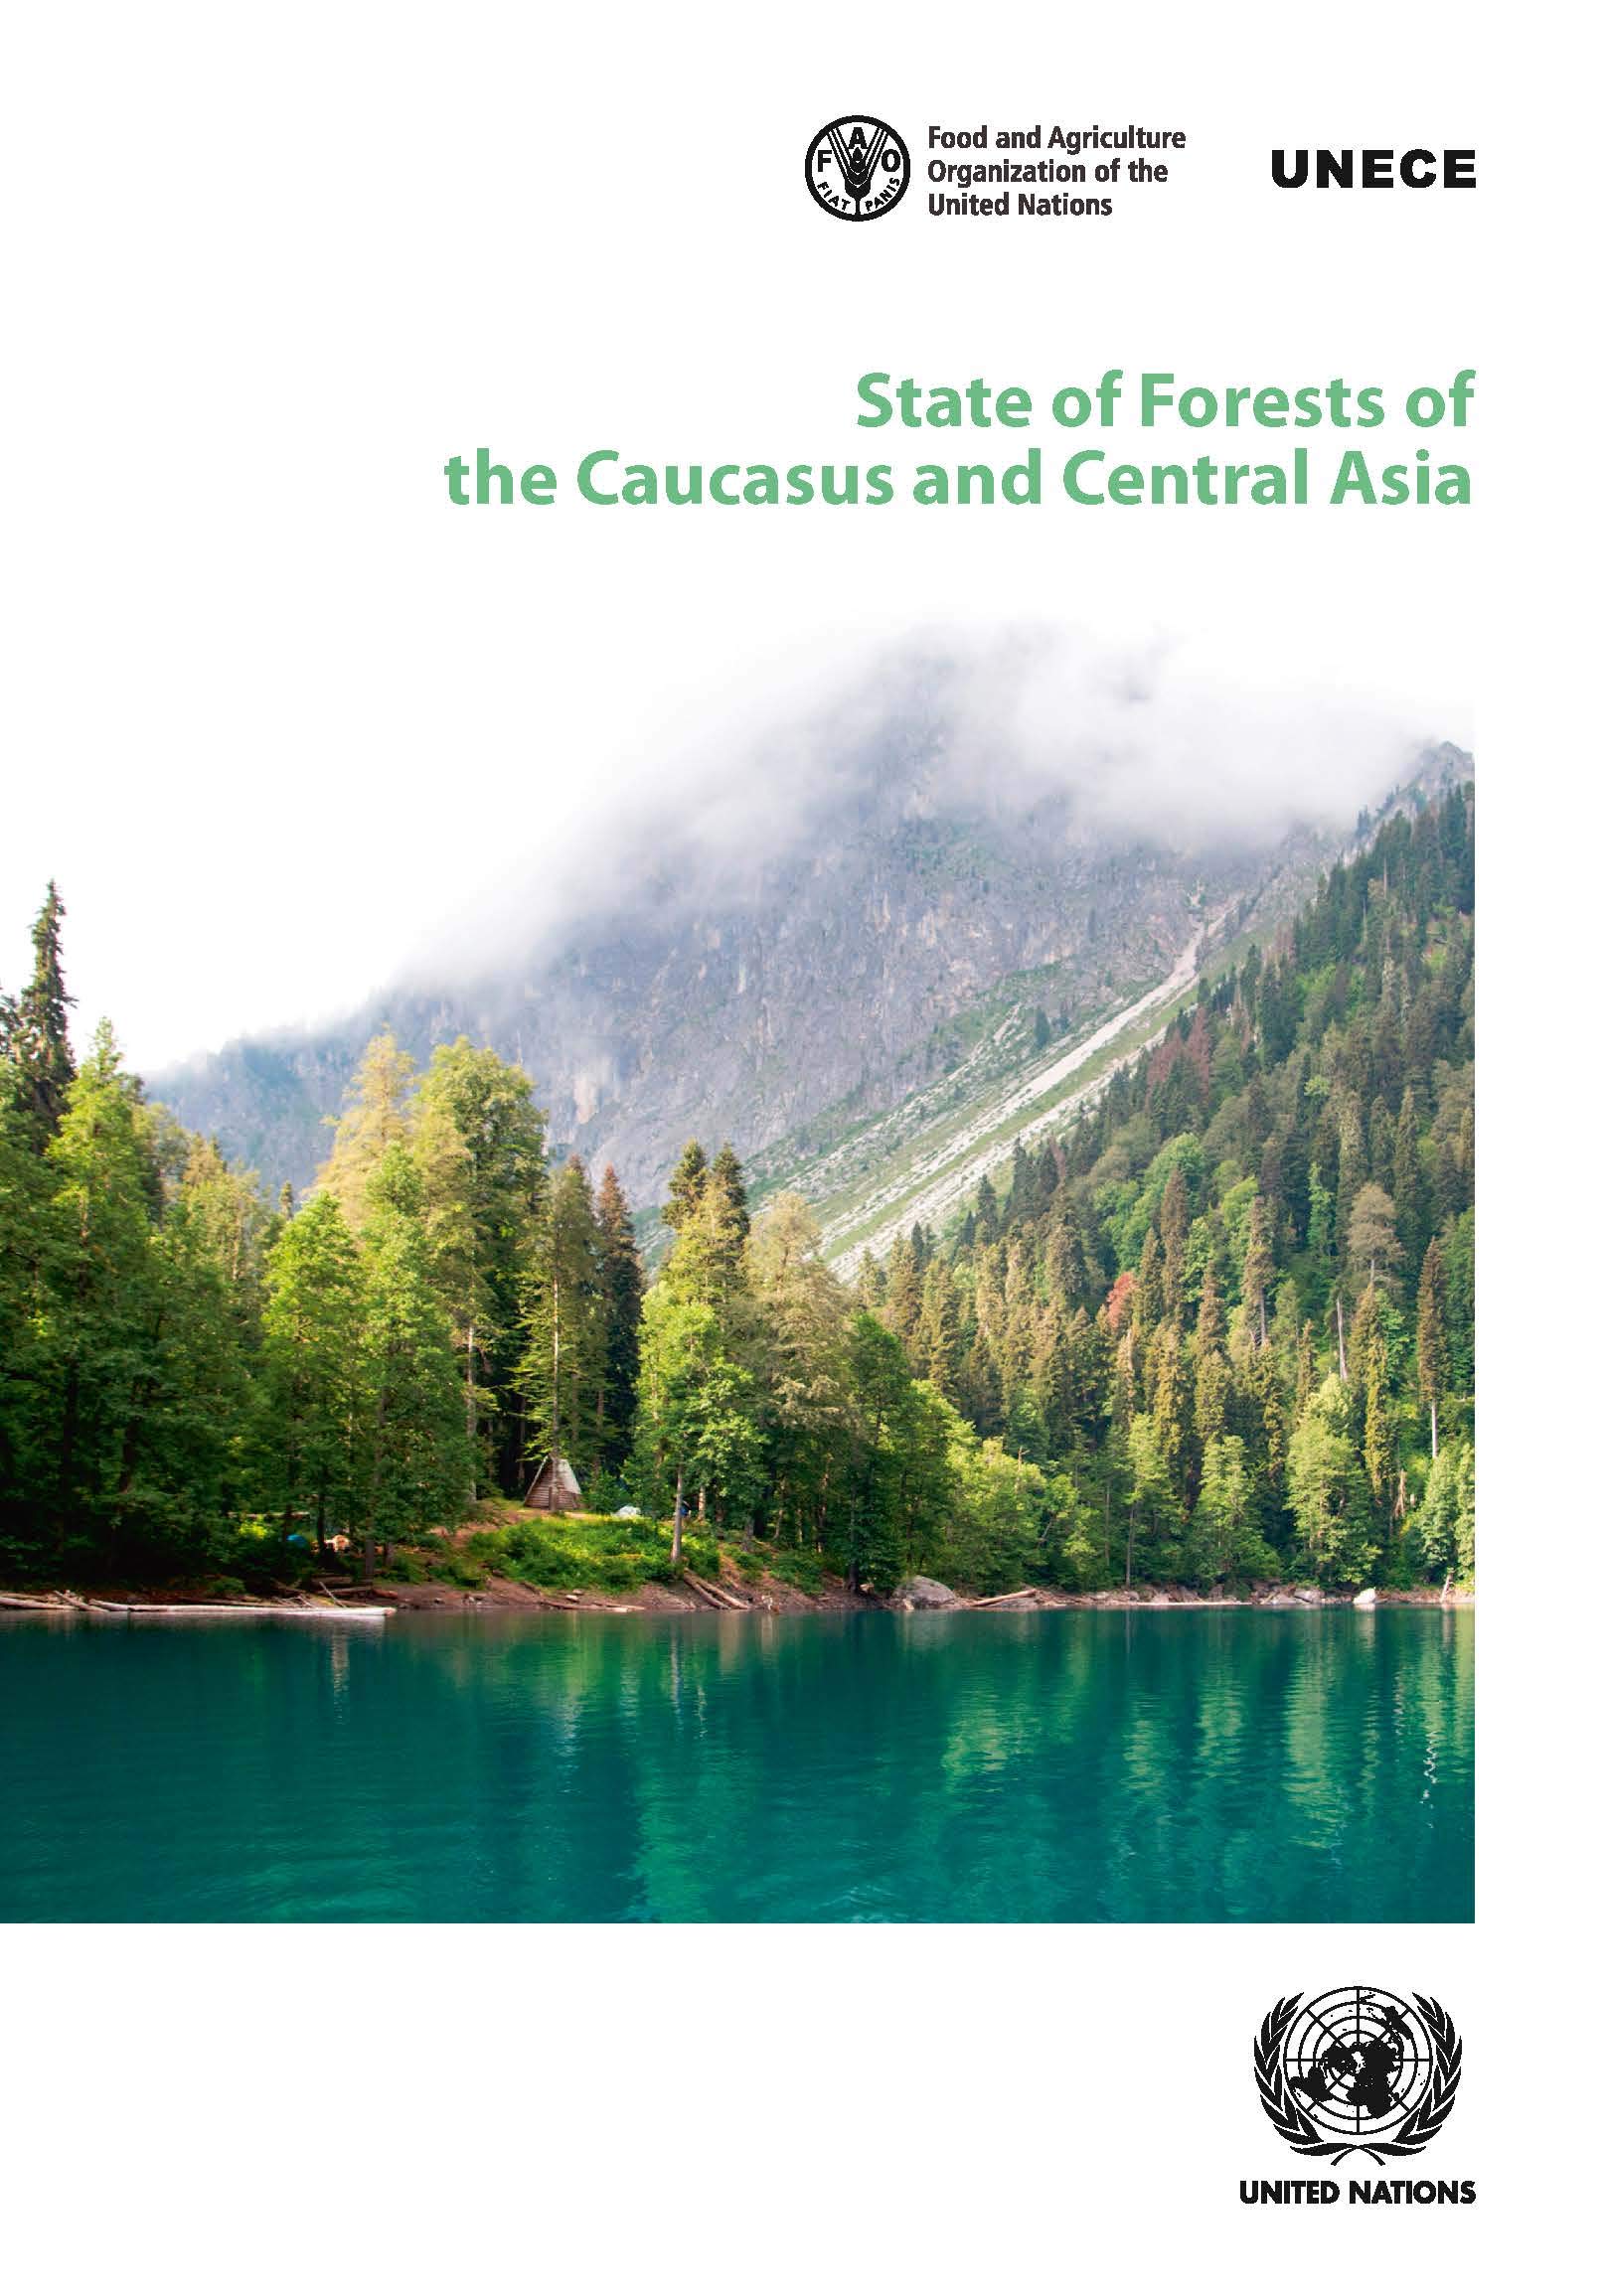 State of forests of the Caucasus and Central Asia : overview of forests and sustainable forest management in the Caucasus and Central Asia region 책표지